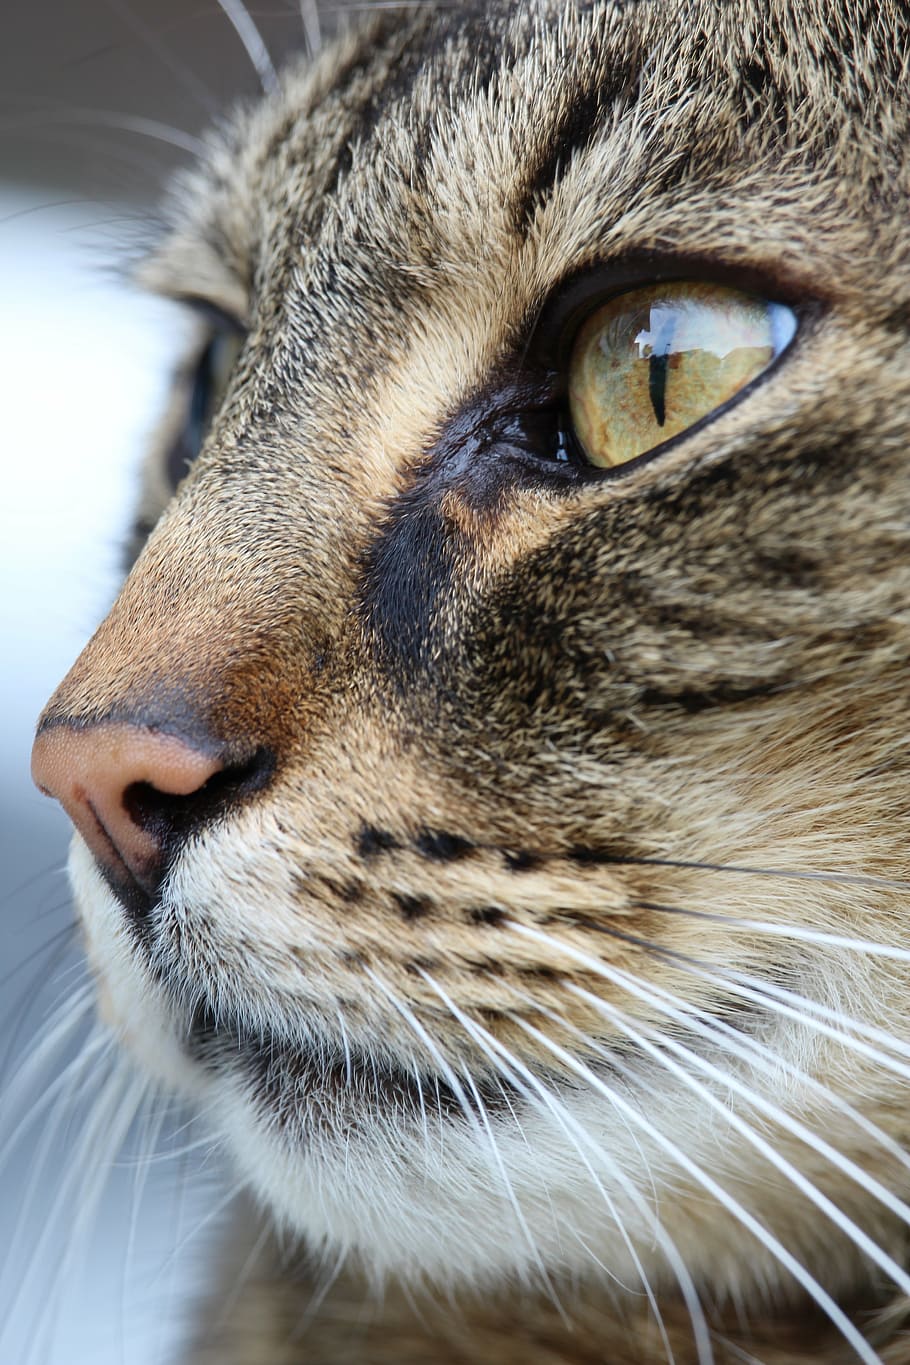 close-up photo of brown tabby cat's face, nose, eye, cat face